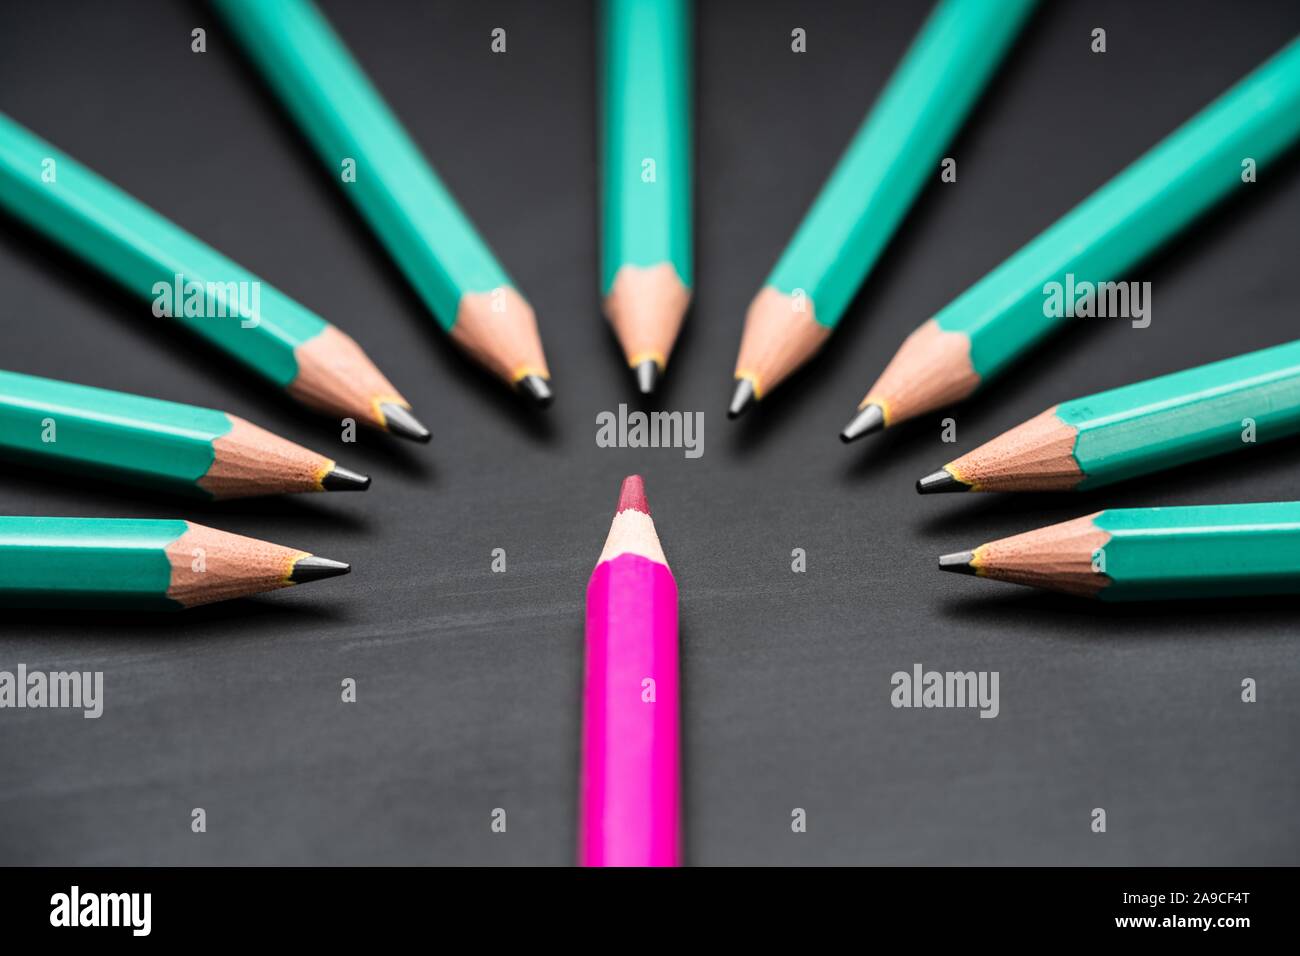 Pink Colored Pencil Surrounded With Green Lead Pencils On Black Chalkboard Stock Photo